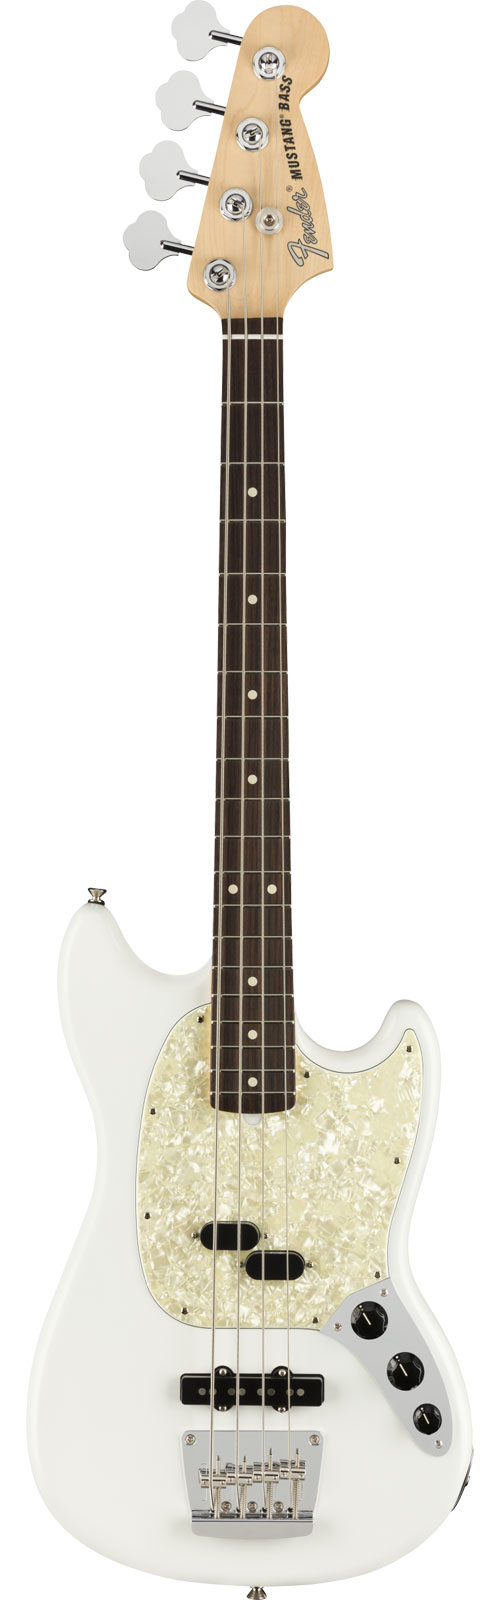 FENDER AMERICAN PERFORMER MUSTANG BASS RW, ARCTIC WHITE